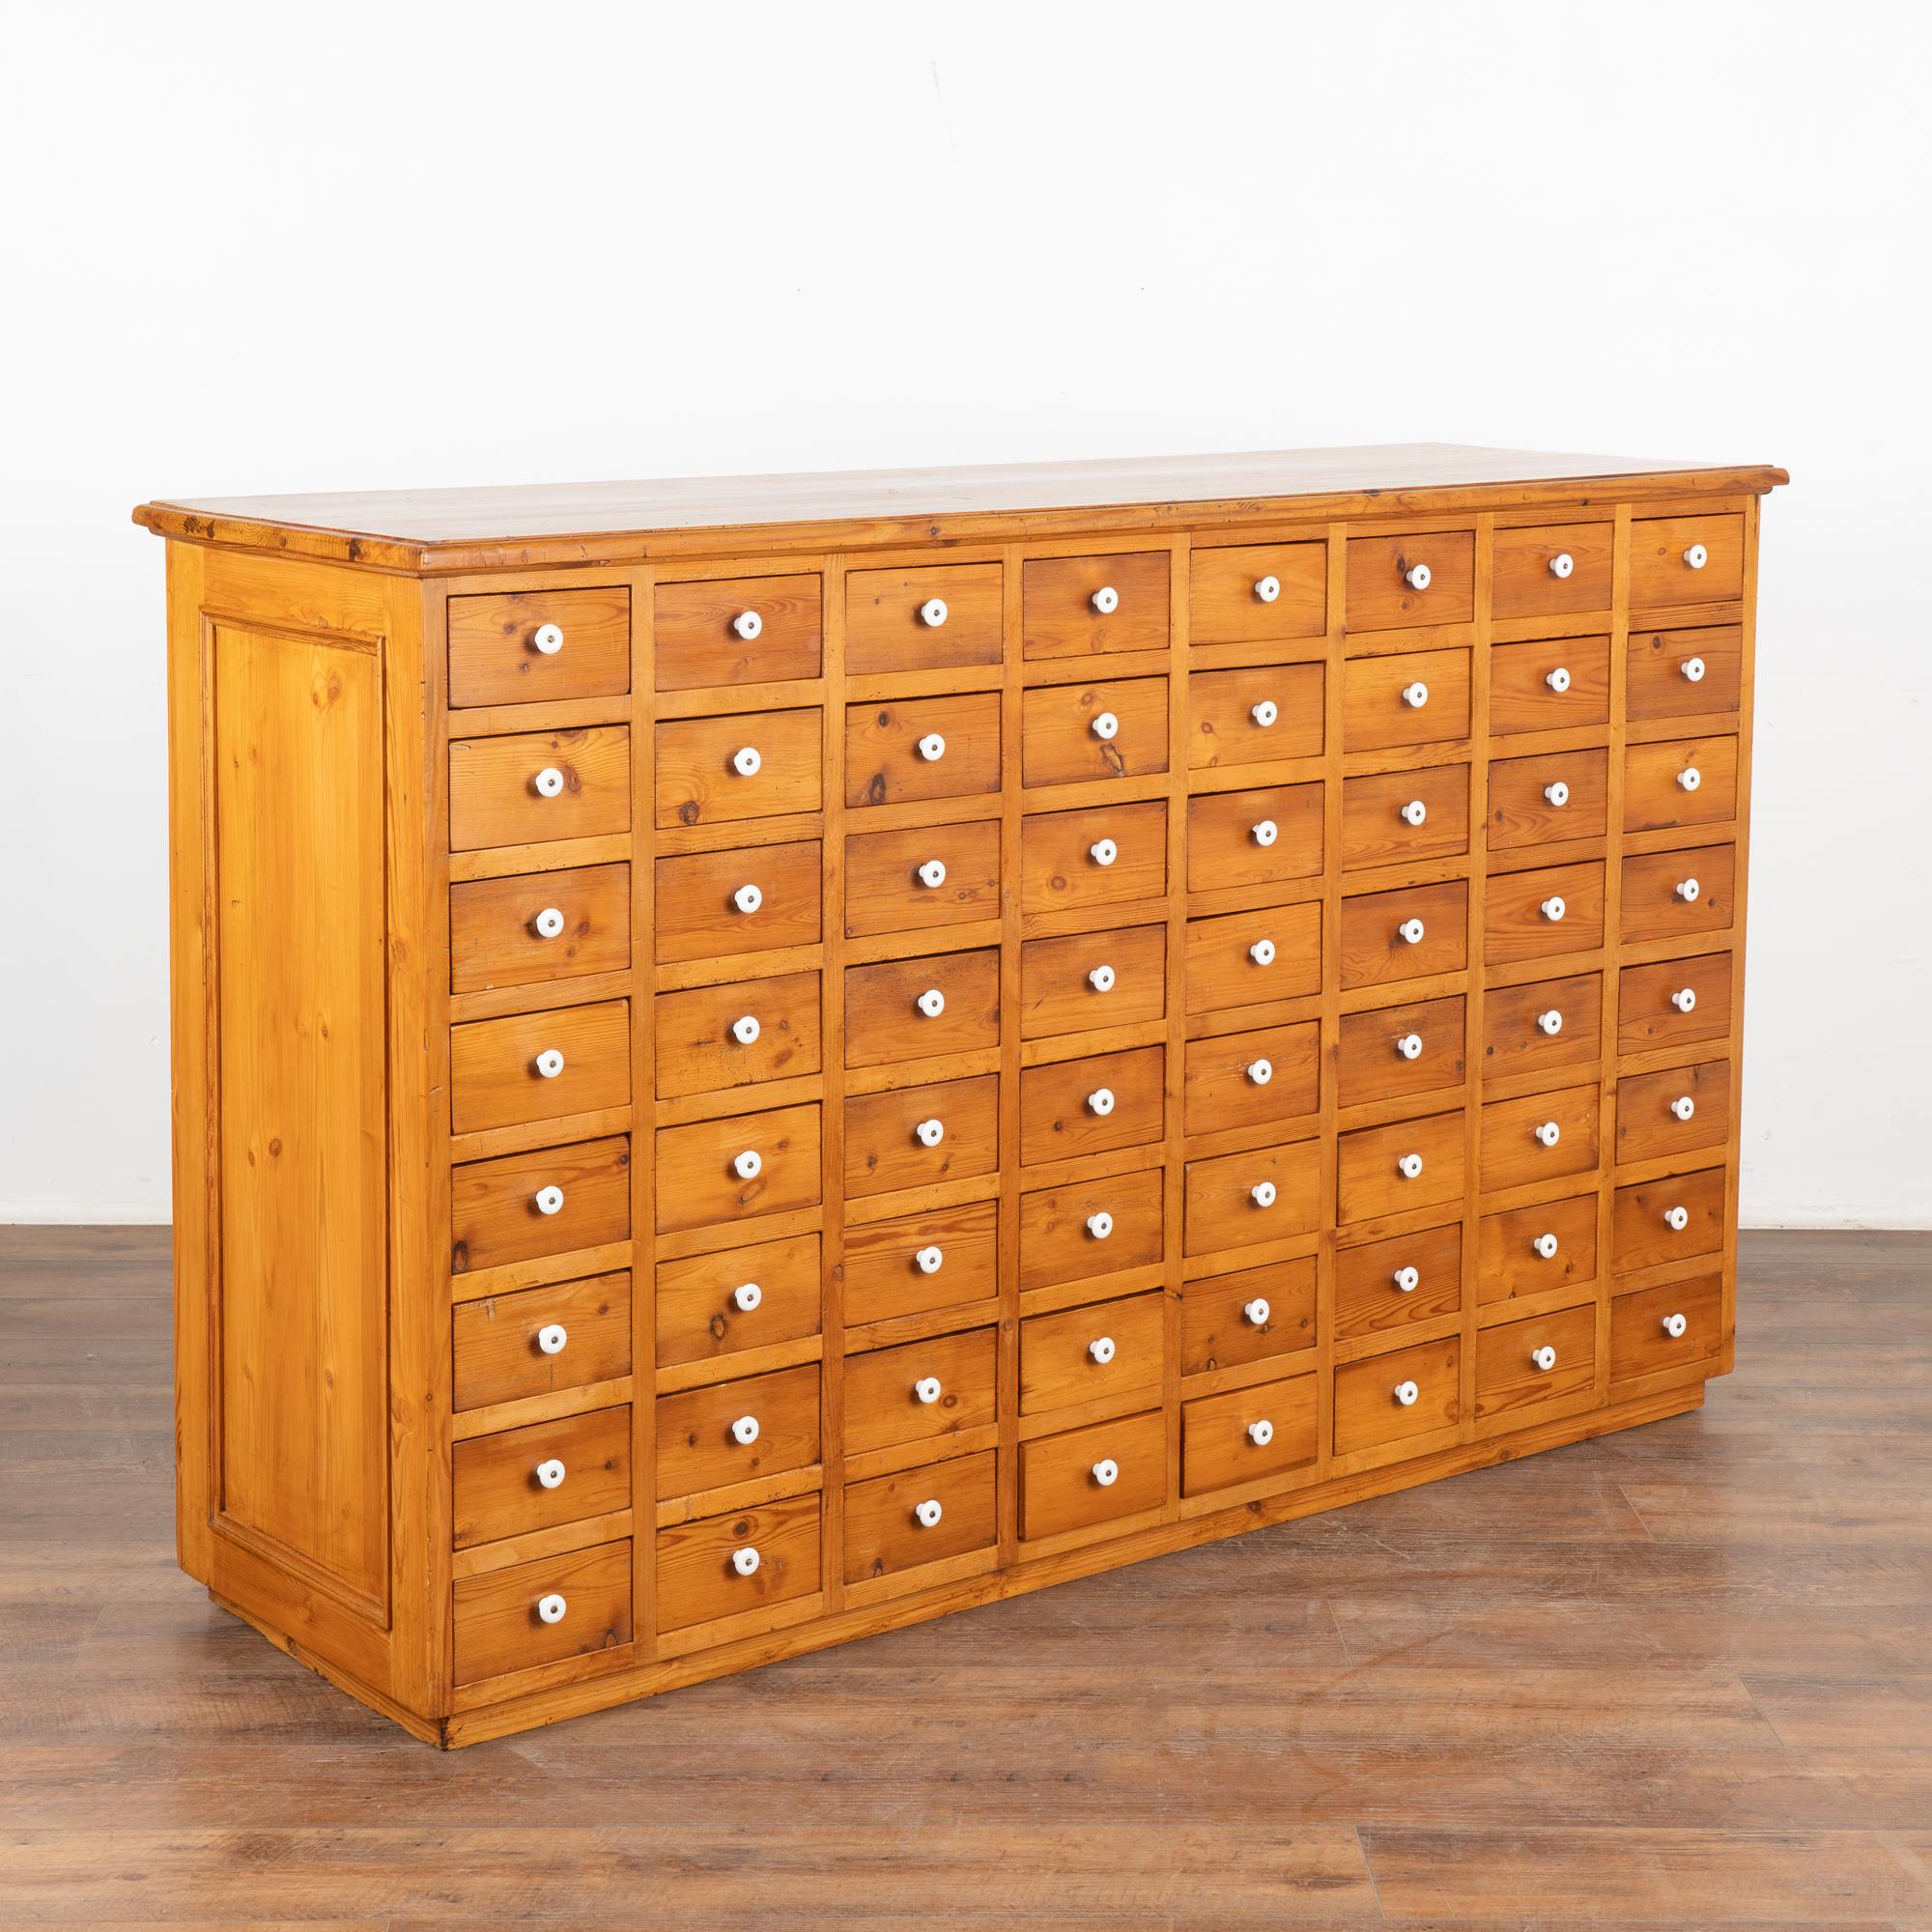 Fun and function abound in this free standing pine apothecary with 64 drawers. This delightful apothecary originally served as a shop counter or storage cabinet. Counters similar to this were used throughout shops in the European during the 1800's,